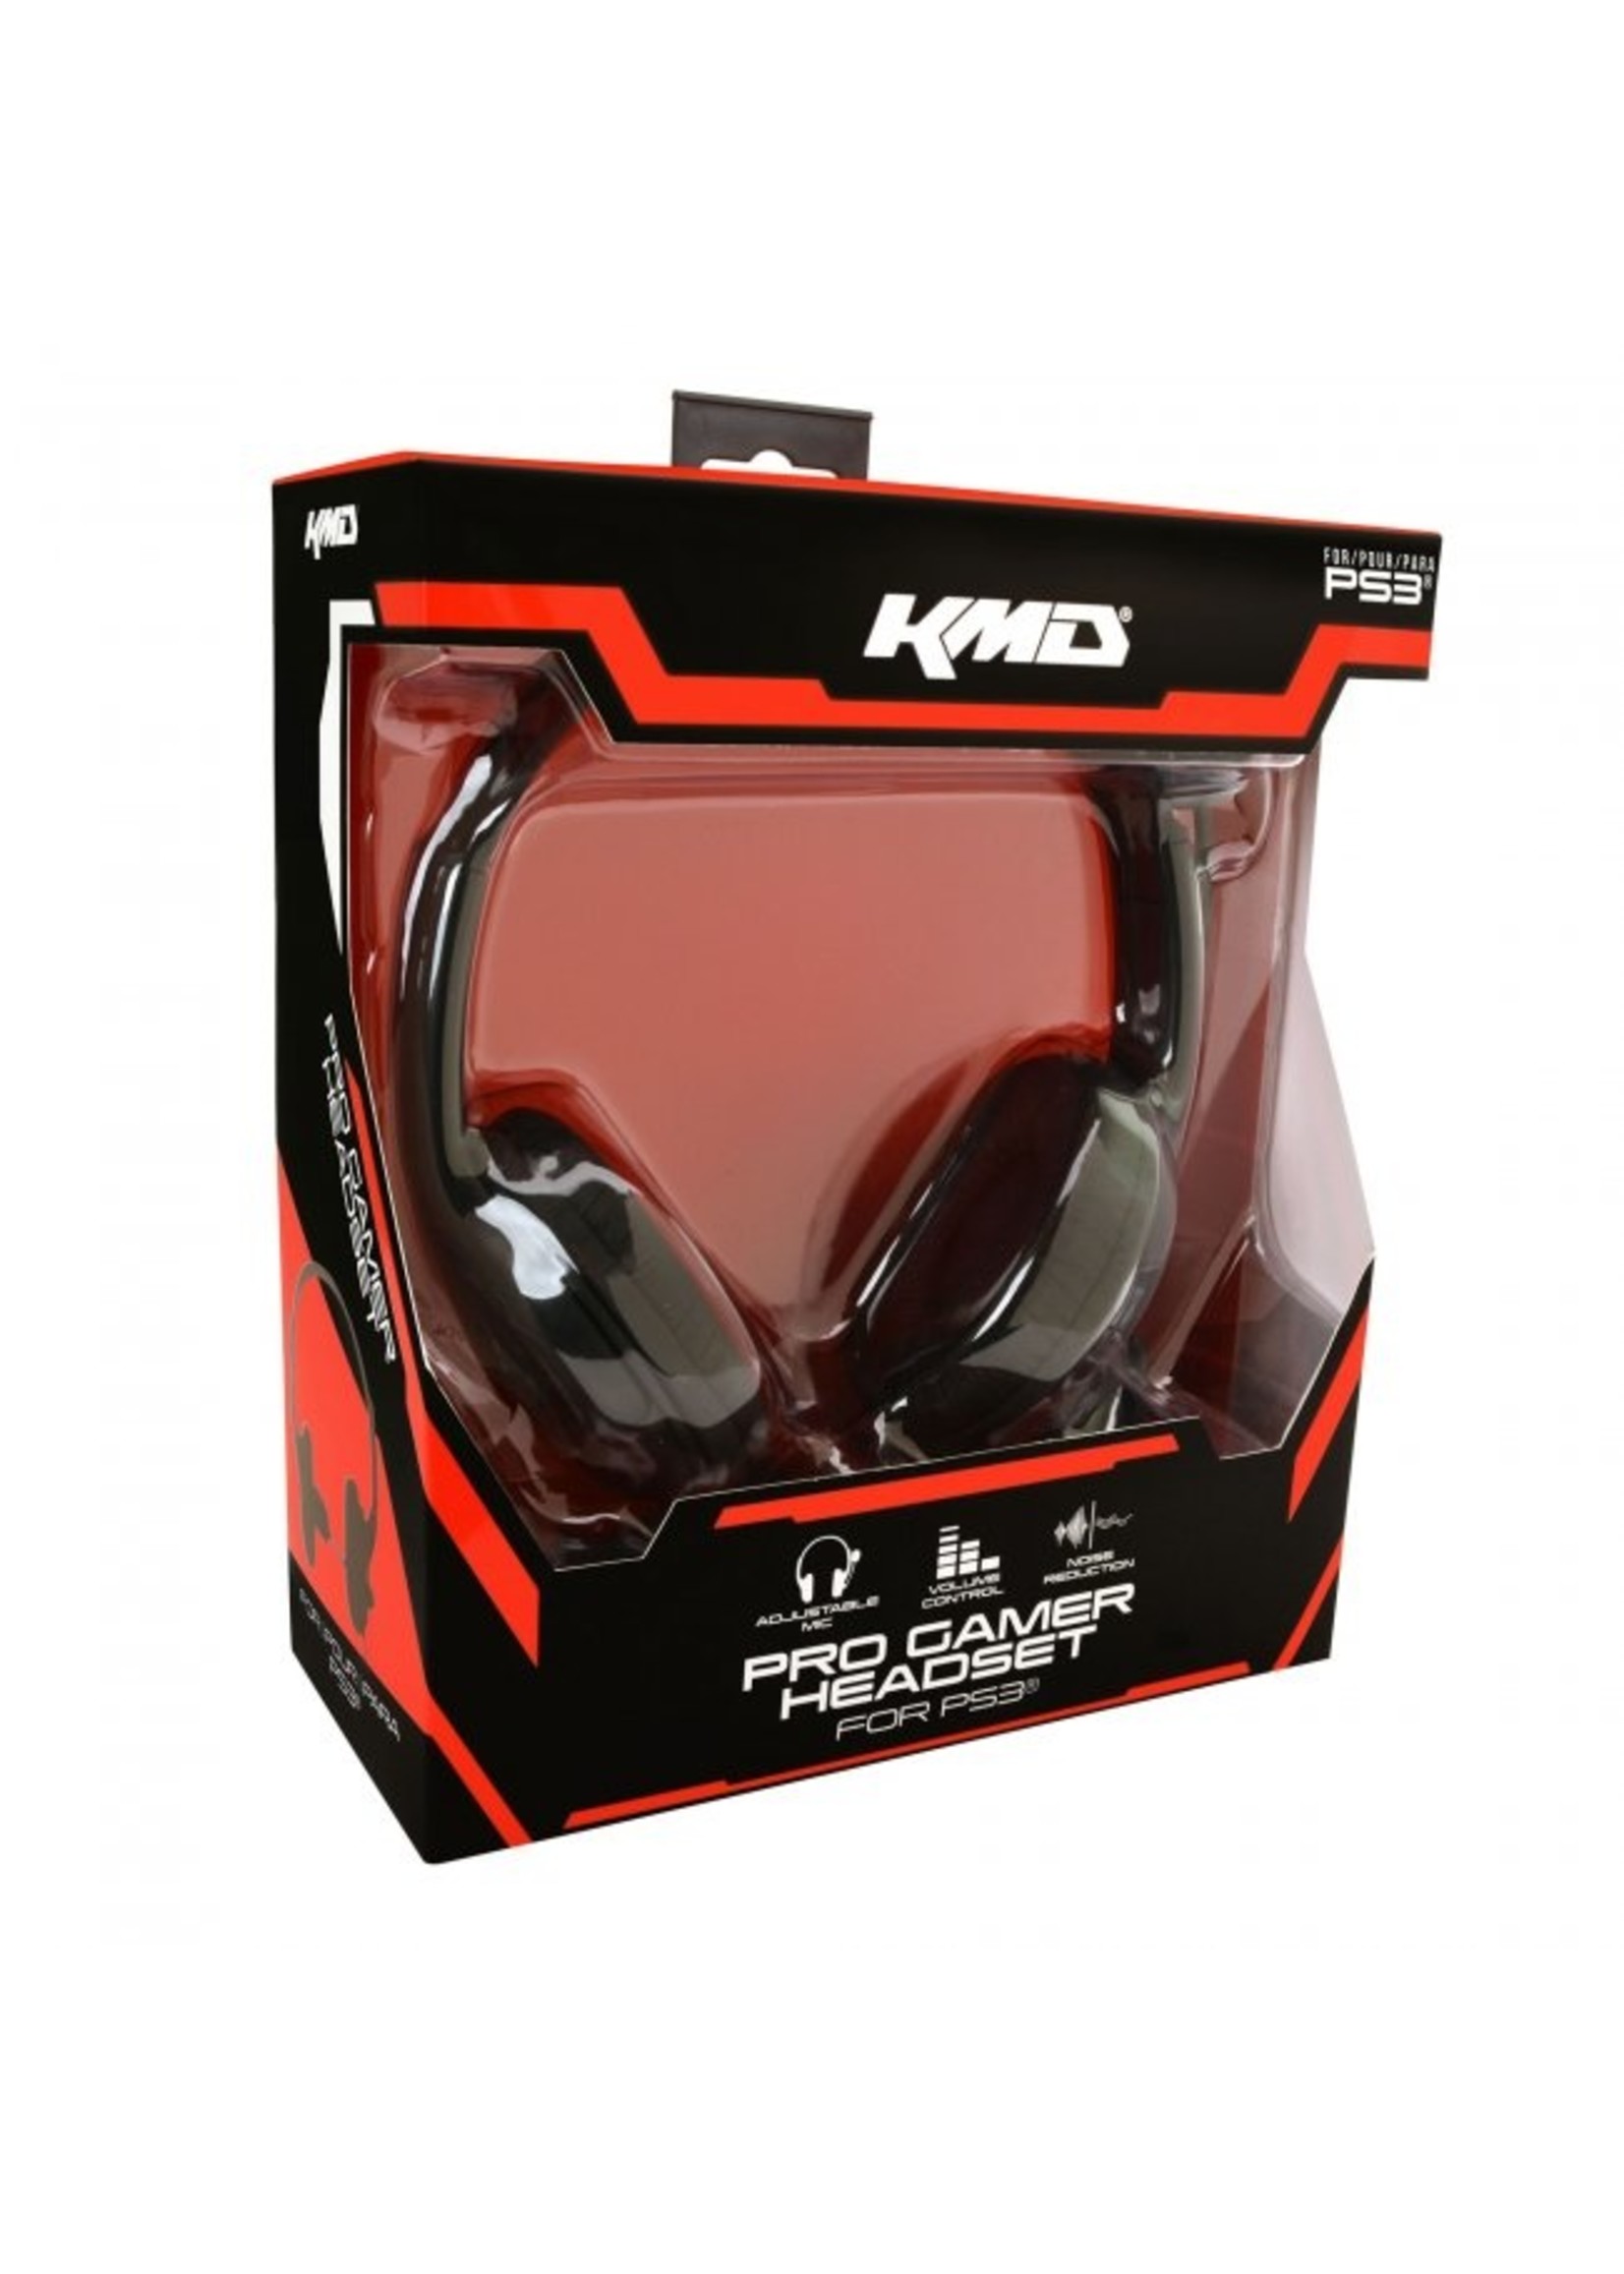 BIGBEN Wired Gaming Headset PS4/PS5